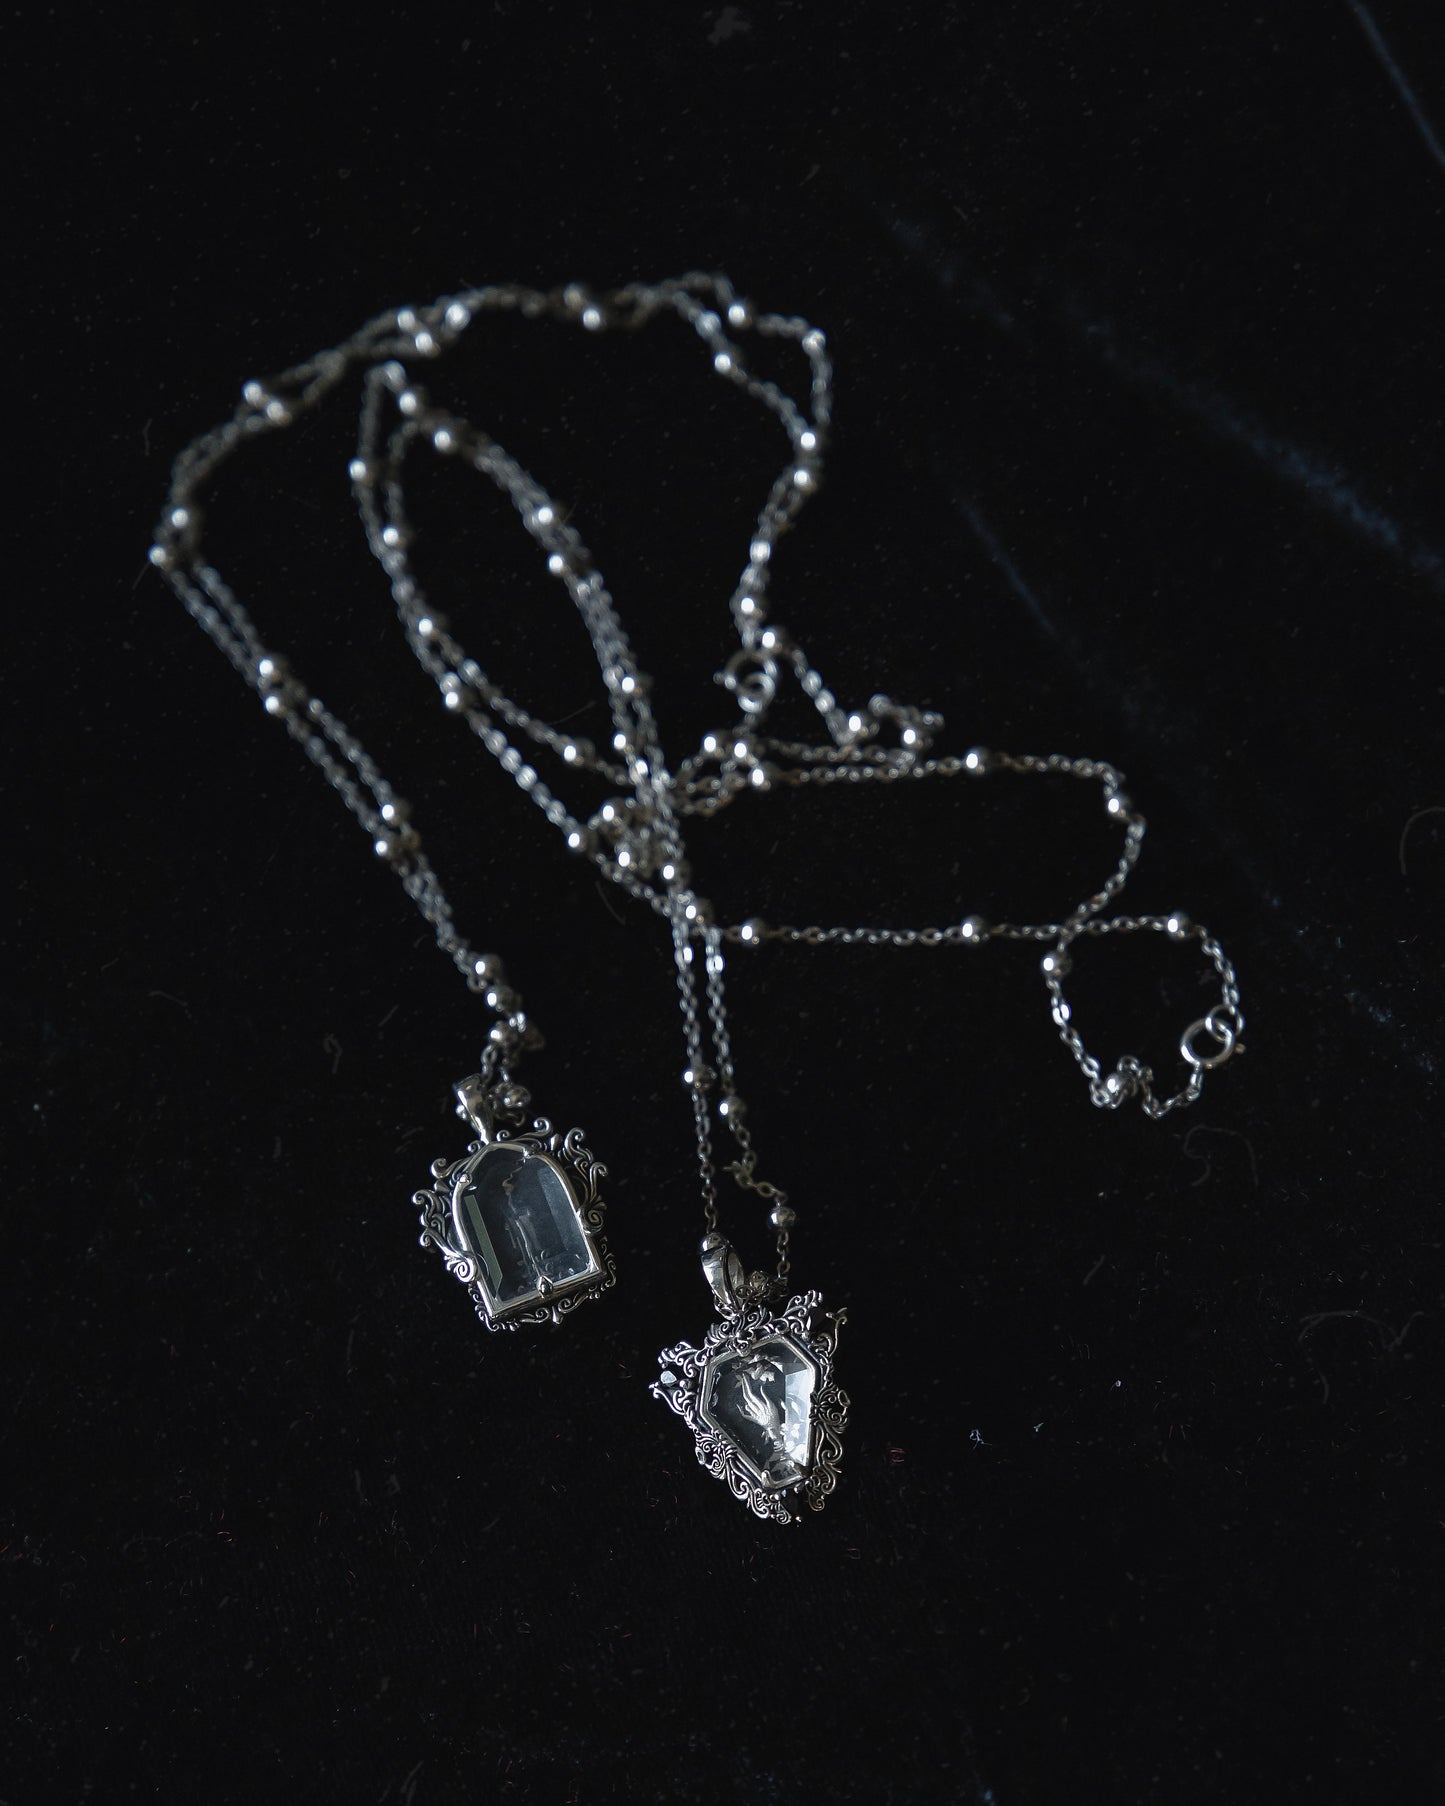 The Glass Casket "Mourning Candle" Necklace